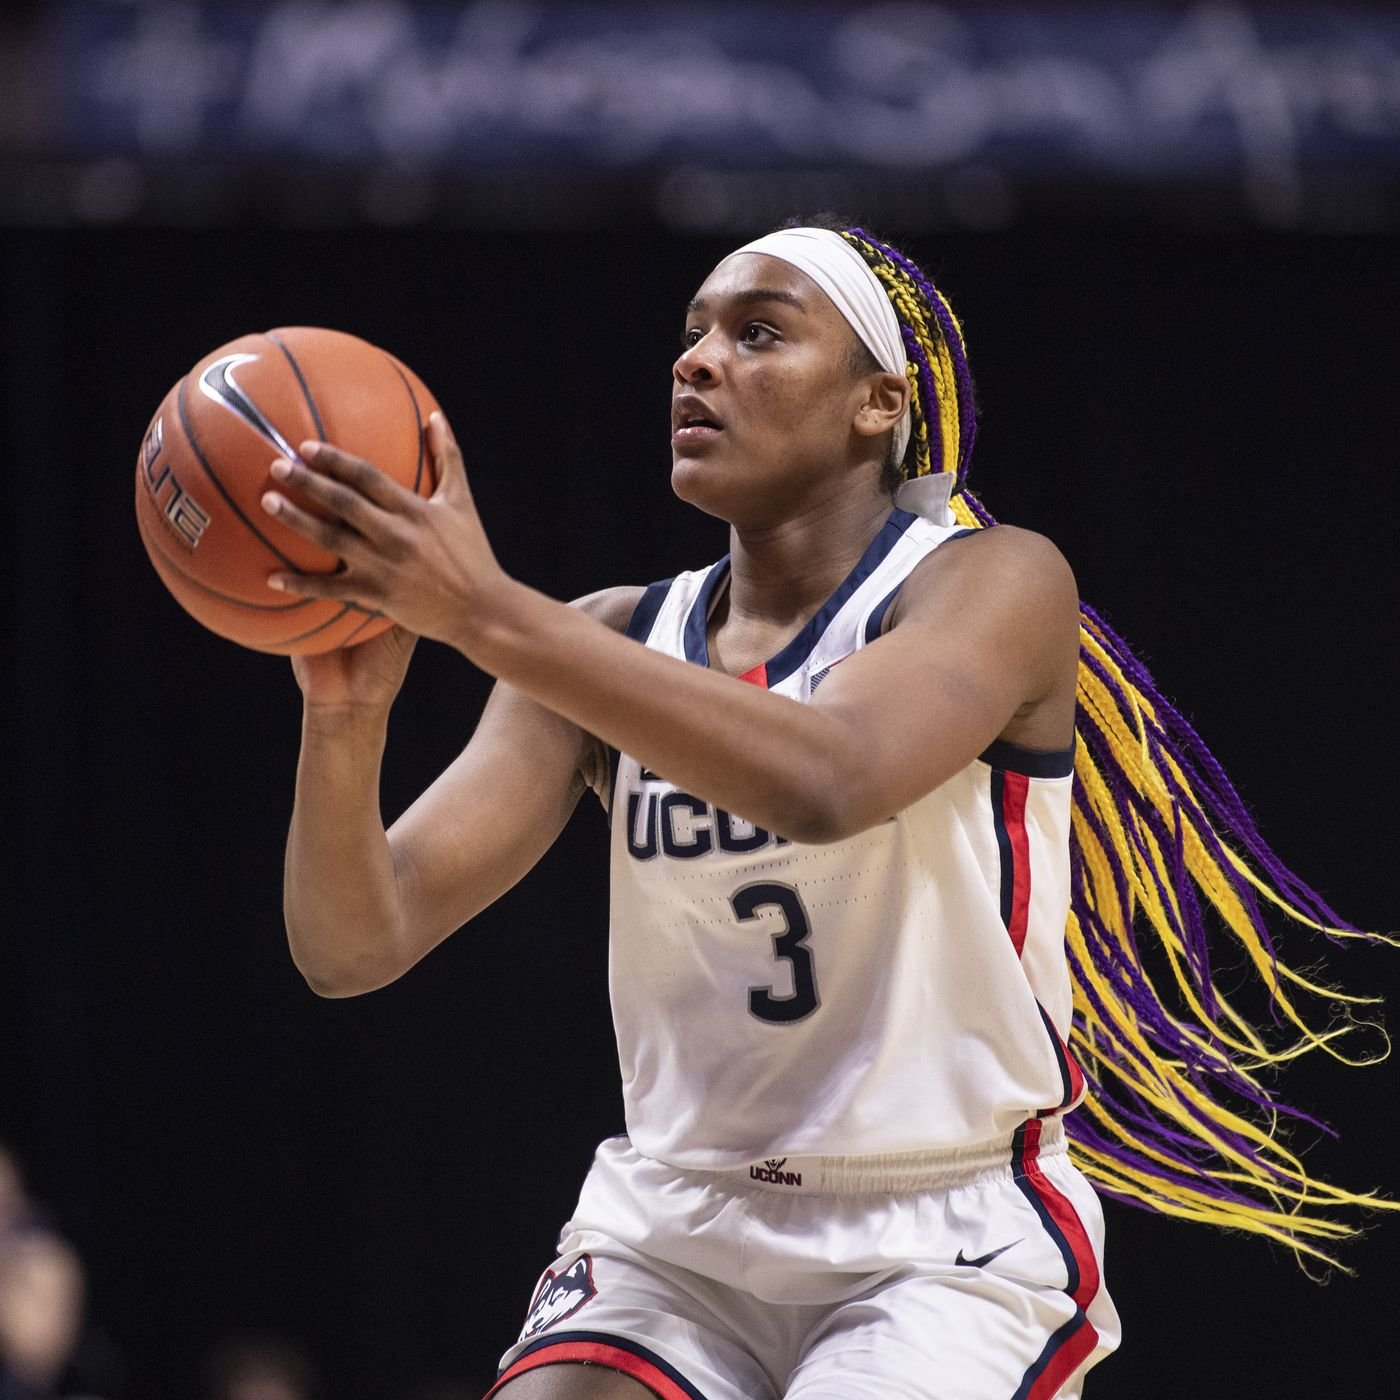 Womens Final Four Players to Watch